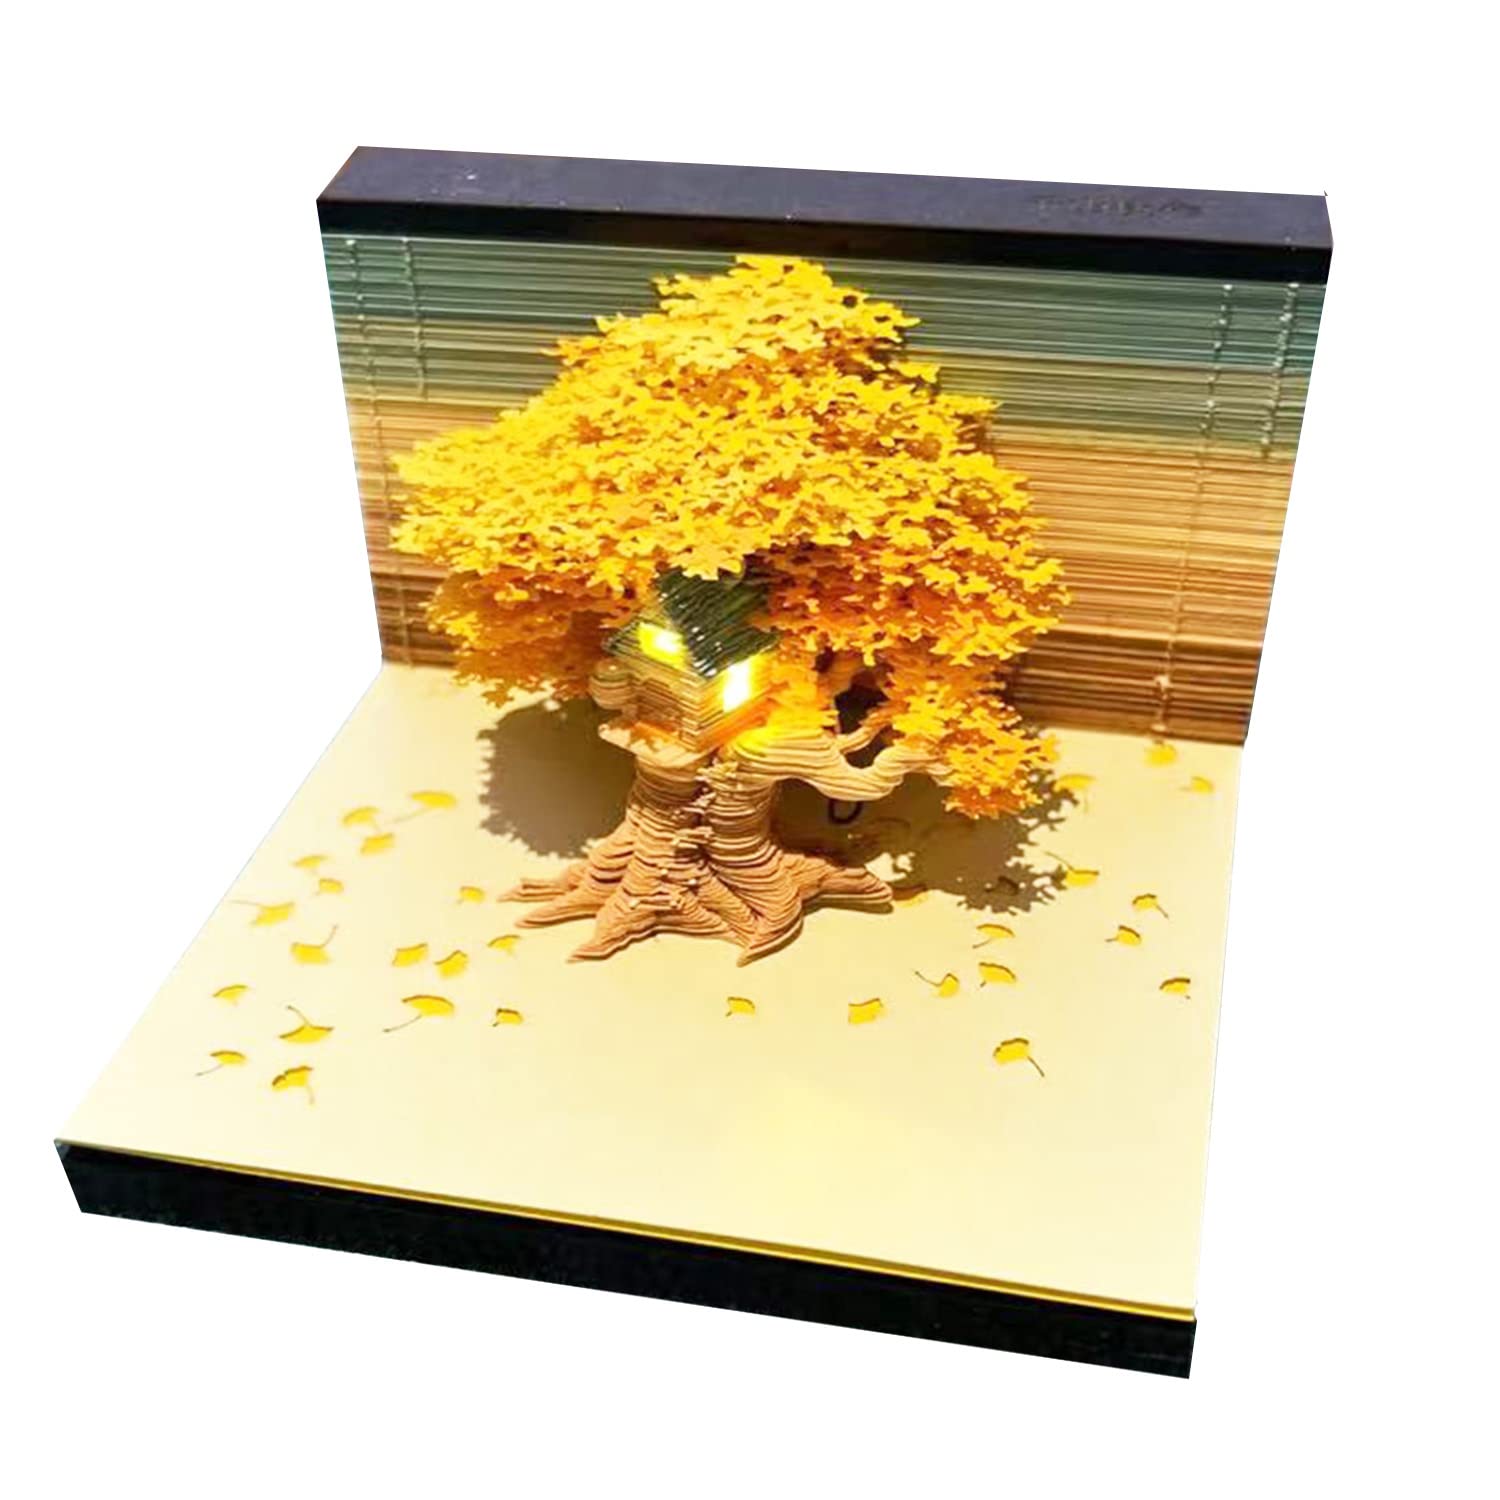 Cherry Blossom Fantasy - 3D Memo Pad with Led Light（Golden Autumn）-BOOK NOOK WORLD